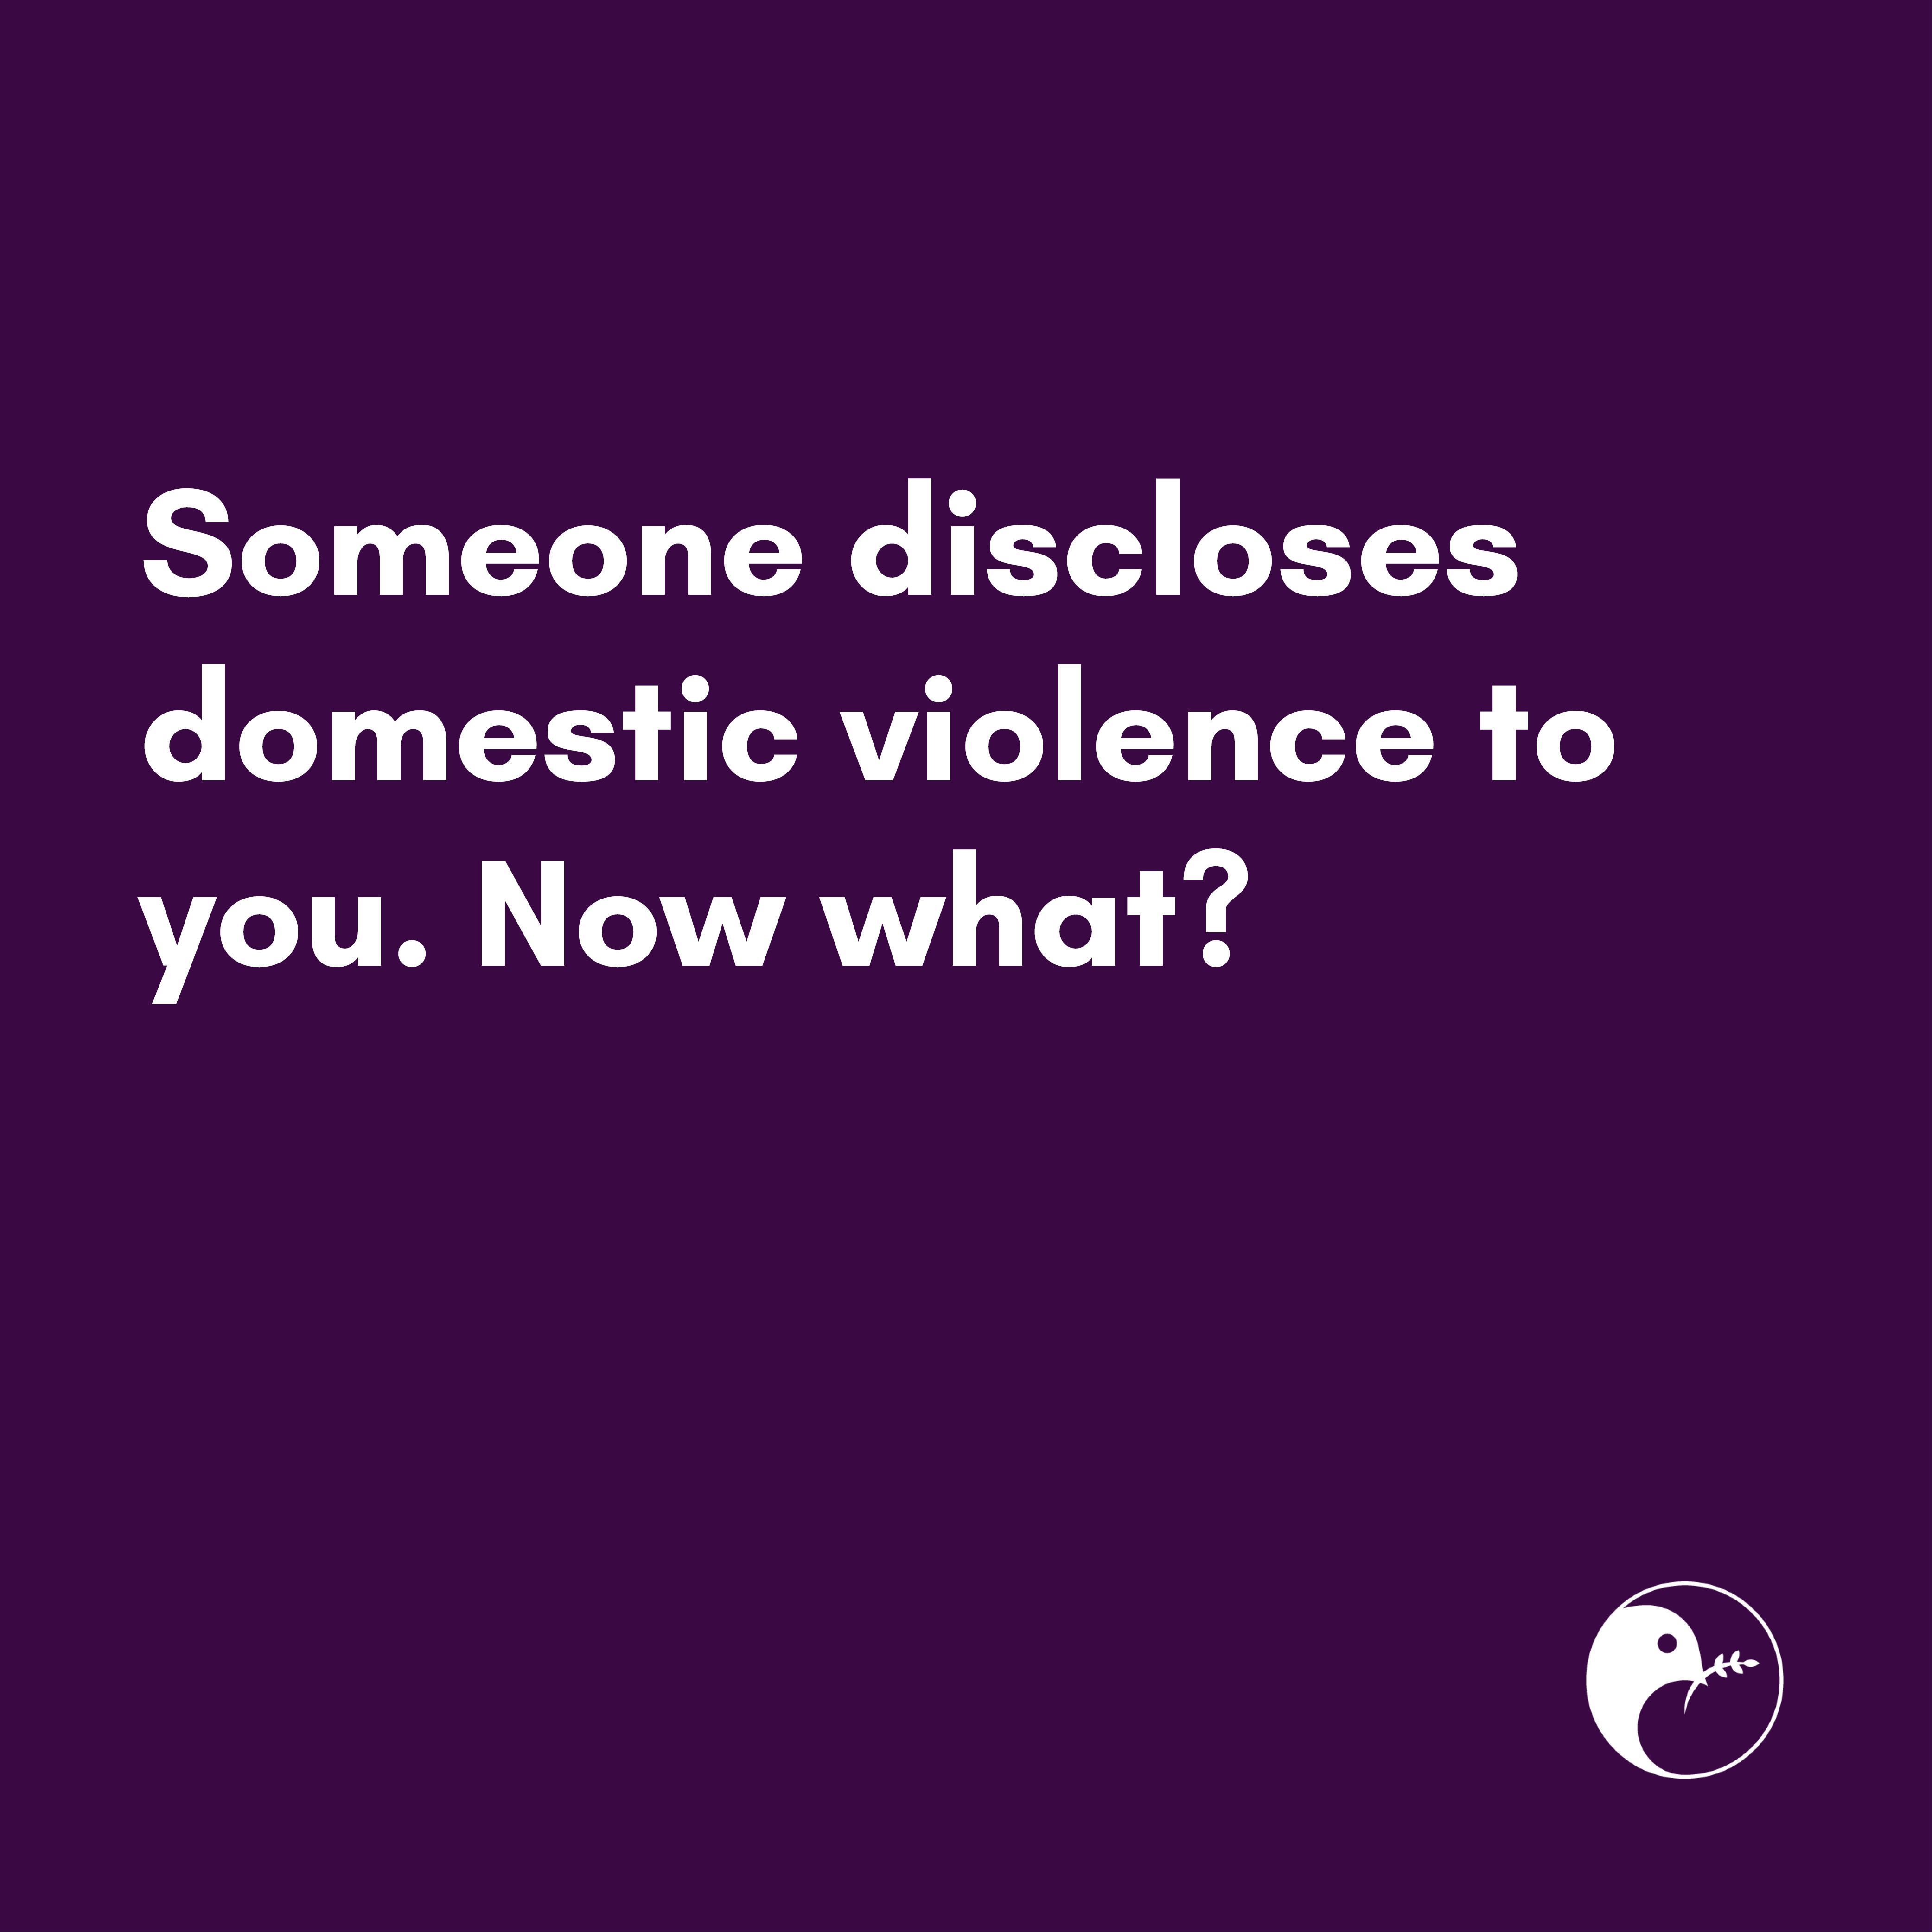 Someone discloses domestic violence to you. Now what?